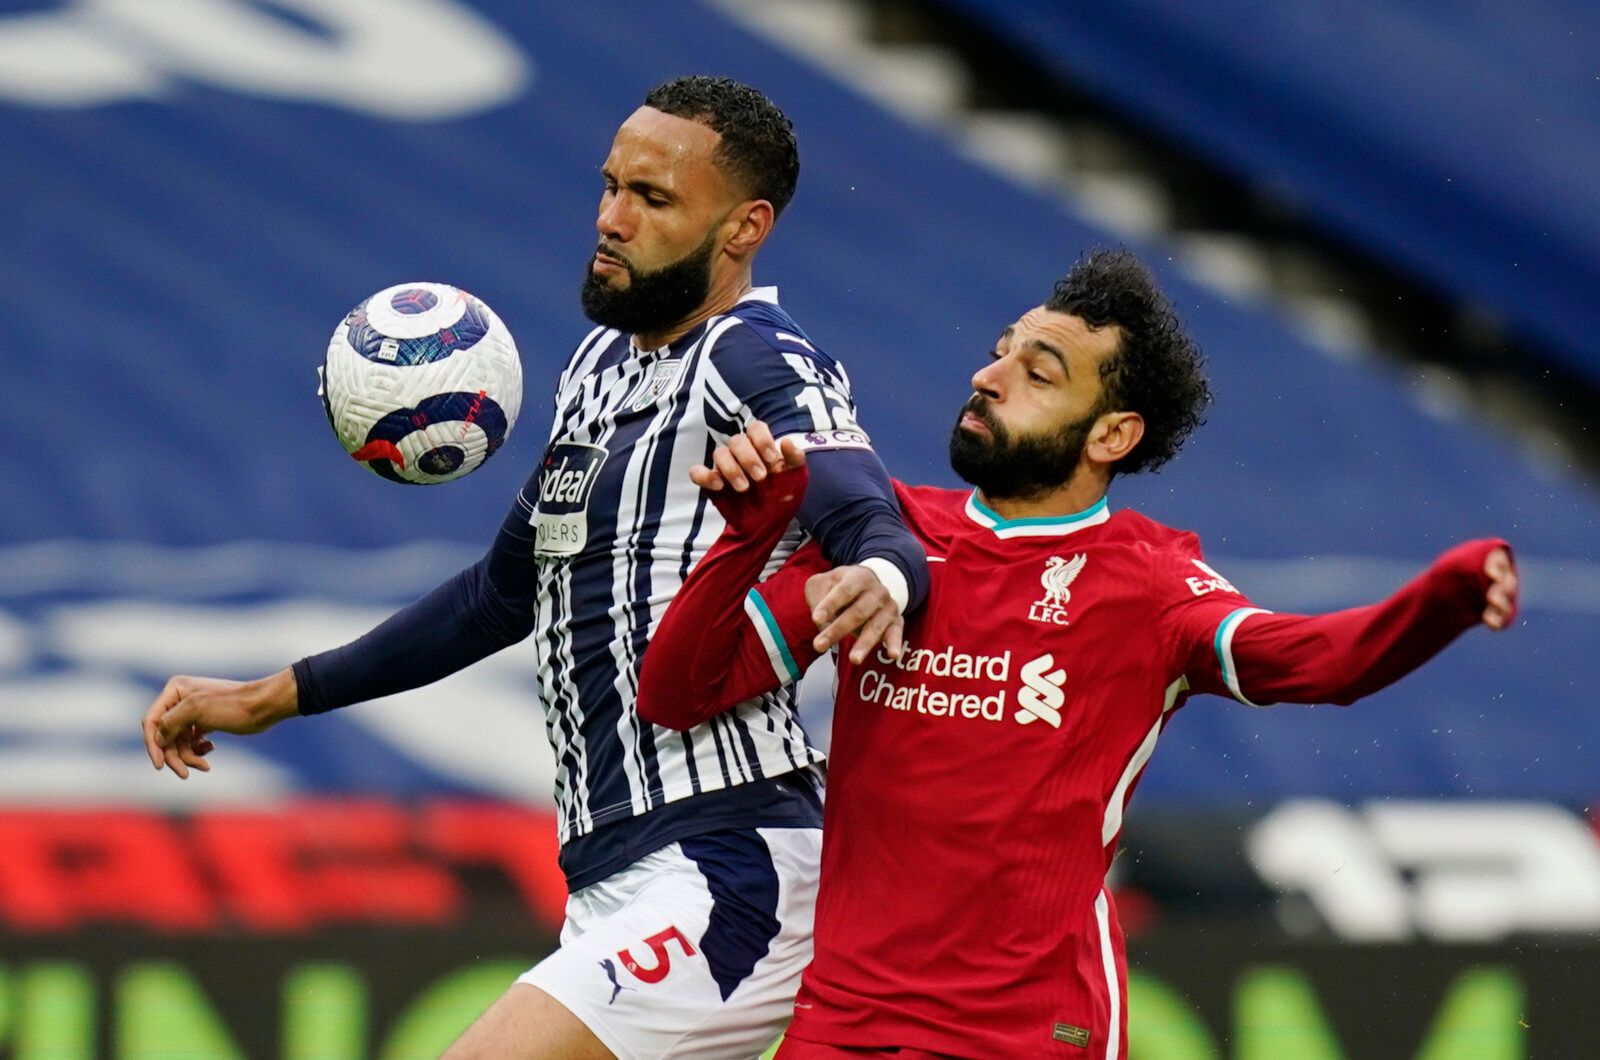 Soccer Football - Premier League - West Bromwich Albion v Liverpool - The Hawthorns, West Bromwich, Britain - May 16, 2021 West Bromwich Albion's Kyle Bartley in action with Liverpool's Mohamed Salah Pool via REUTERS/Tim Keeton EDITORIAL USE ONLY. No use with unauthorized audio, video, data, fixture lists, club/league logos or 'live' services. Online in-match use limited to 75 images, no video emulation. No use in betting, games or single club /league/player publications.  Please contact your ac